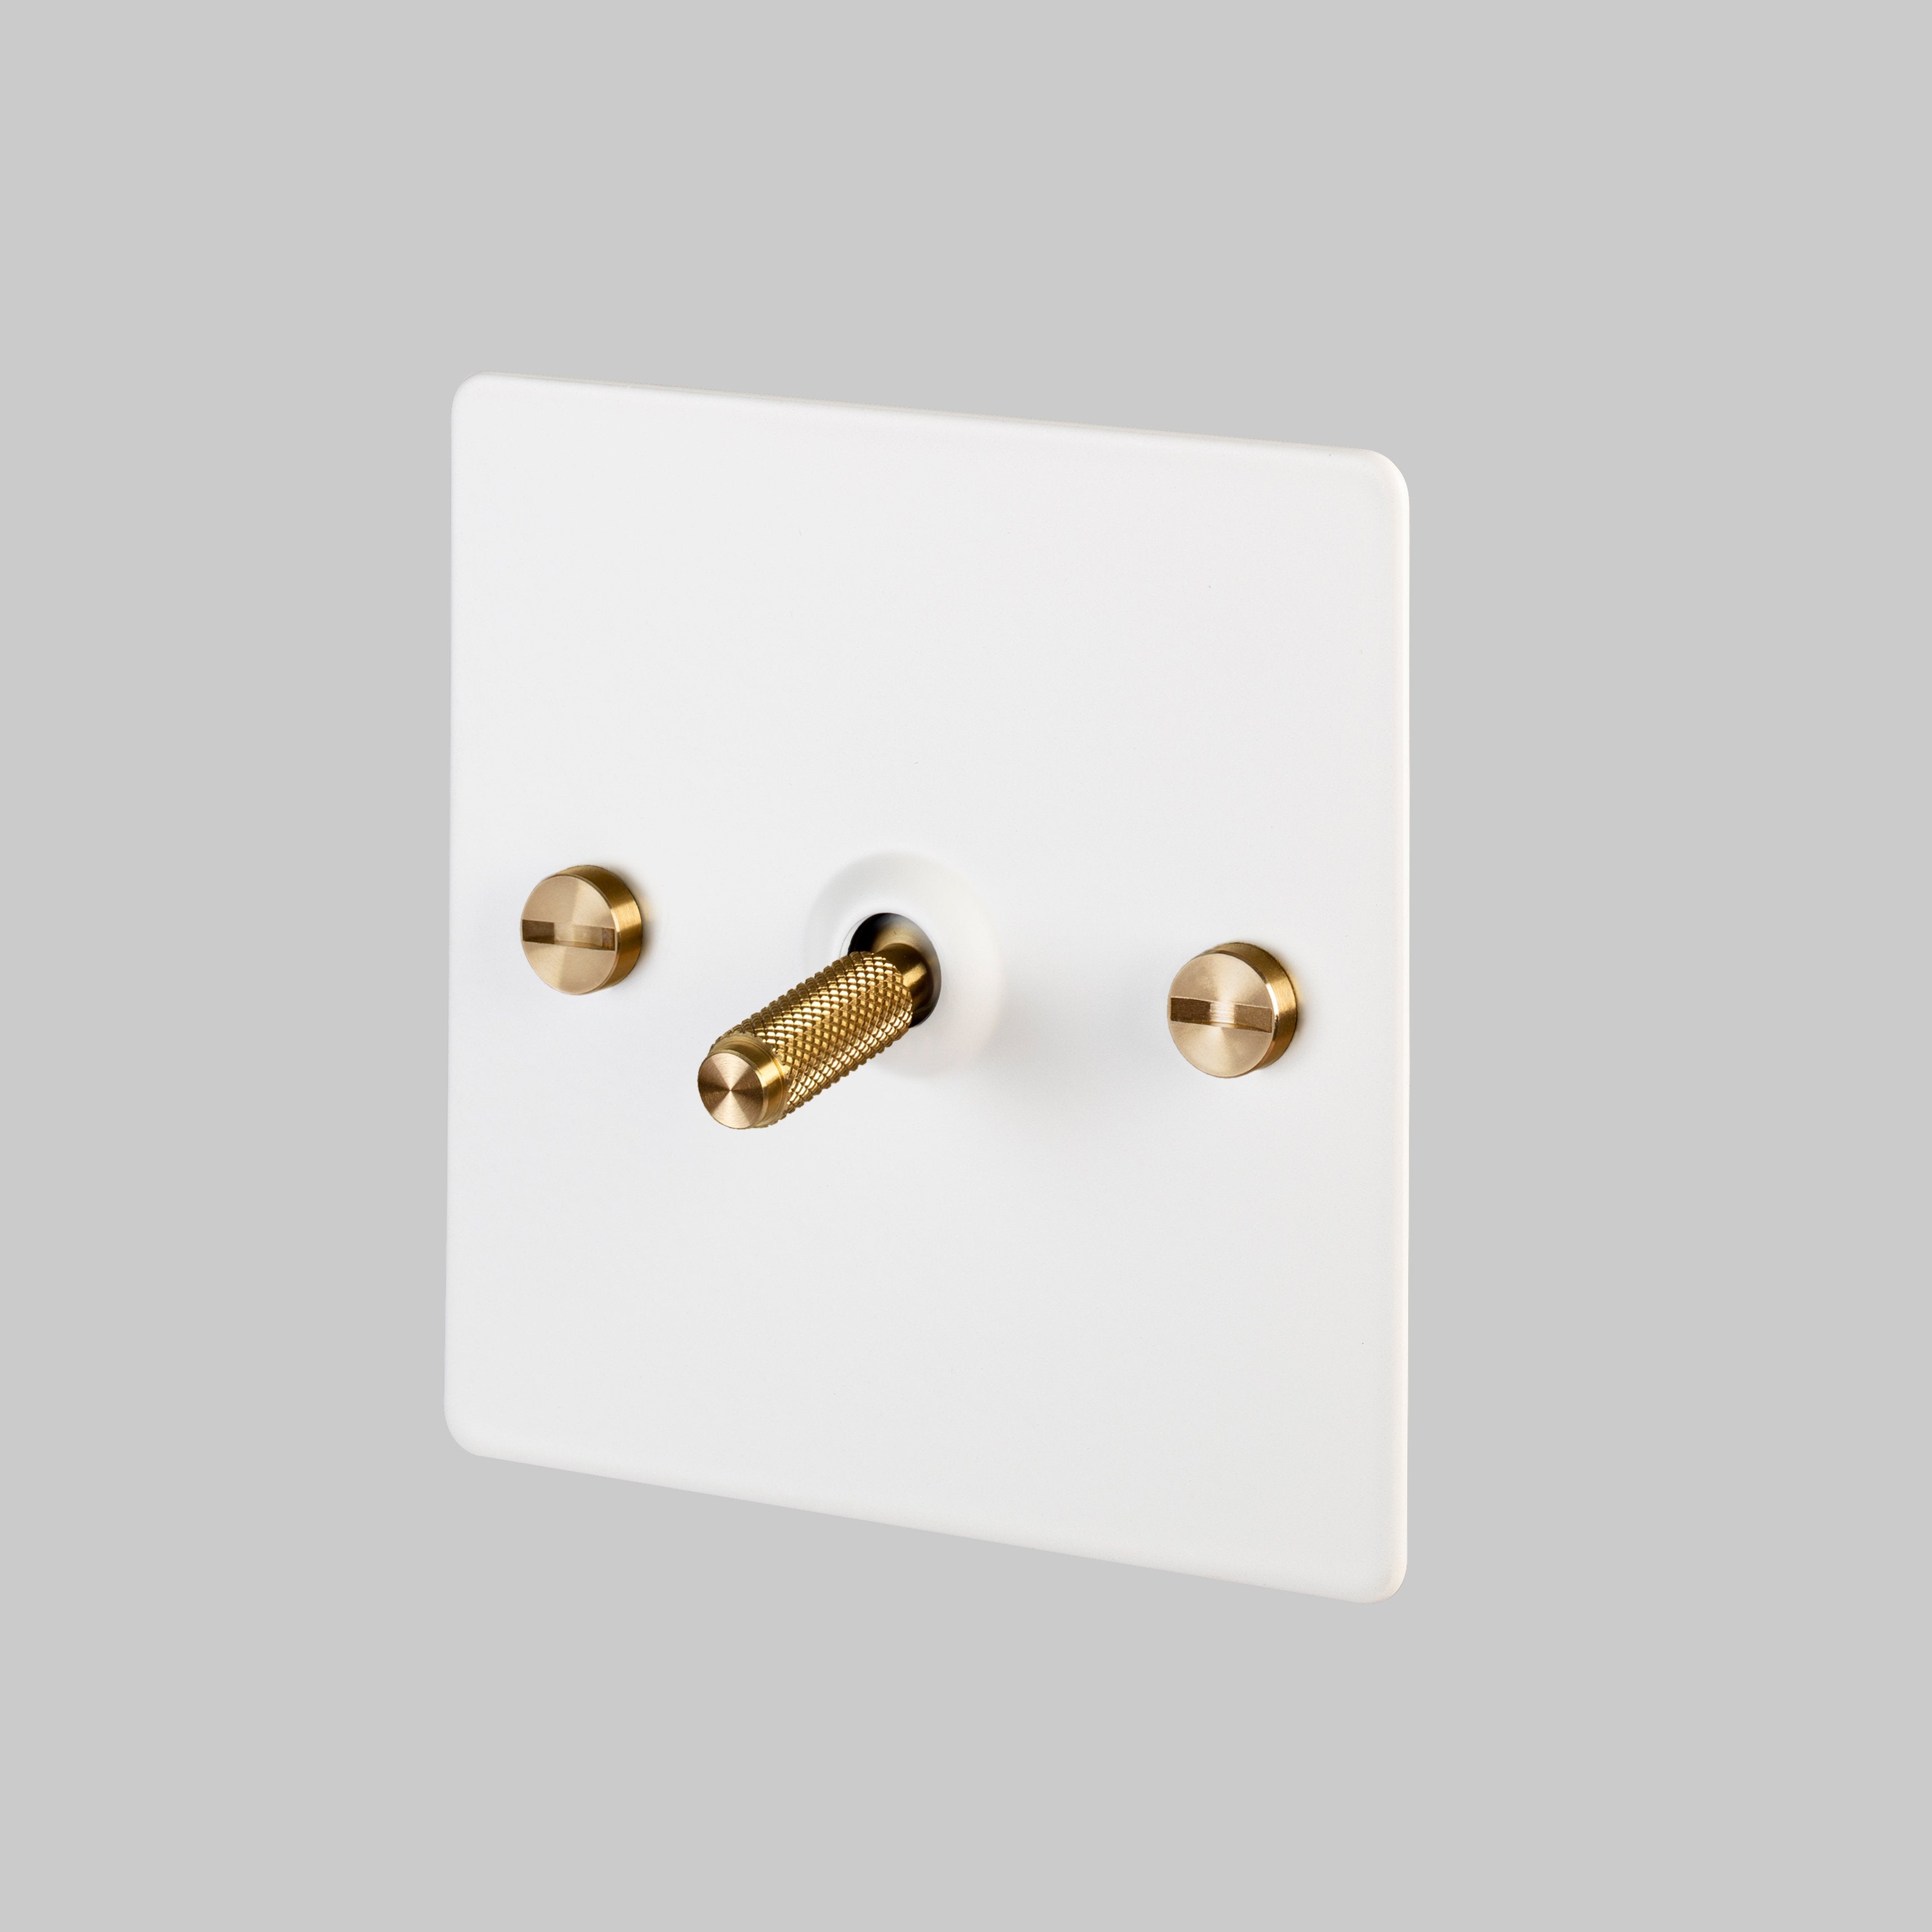 Buster and Punch 1G TOGGLE SWITCH / WHITE / BRASS